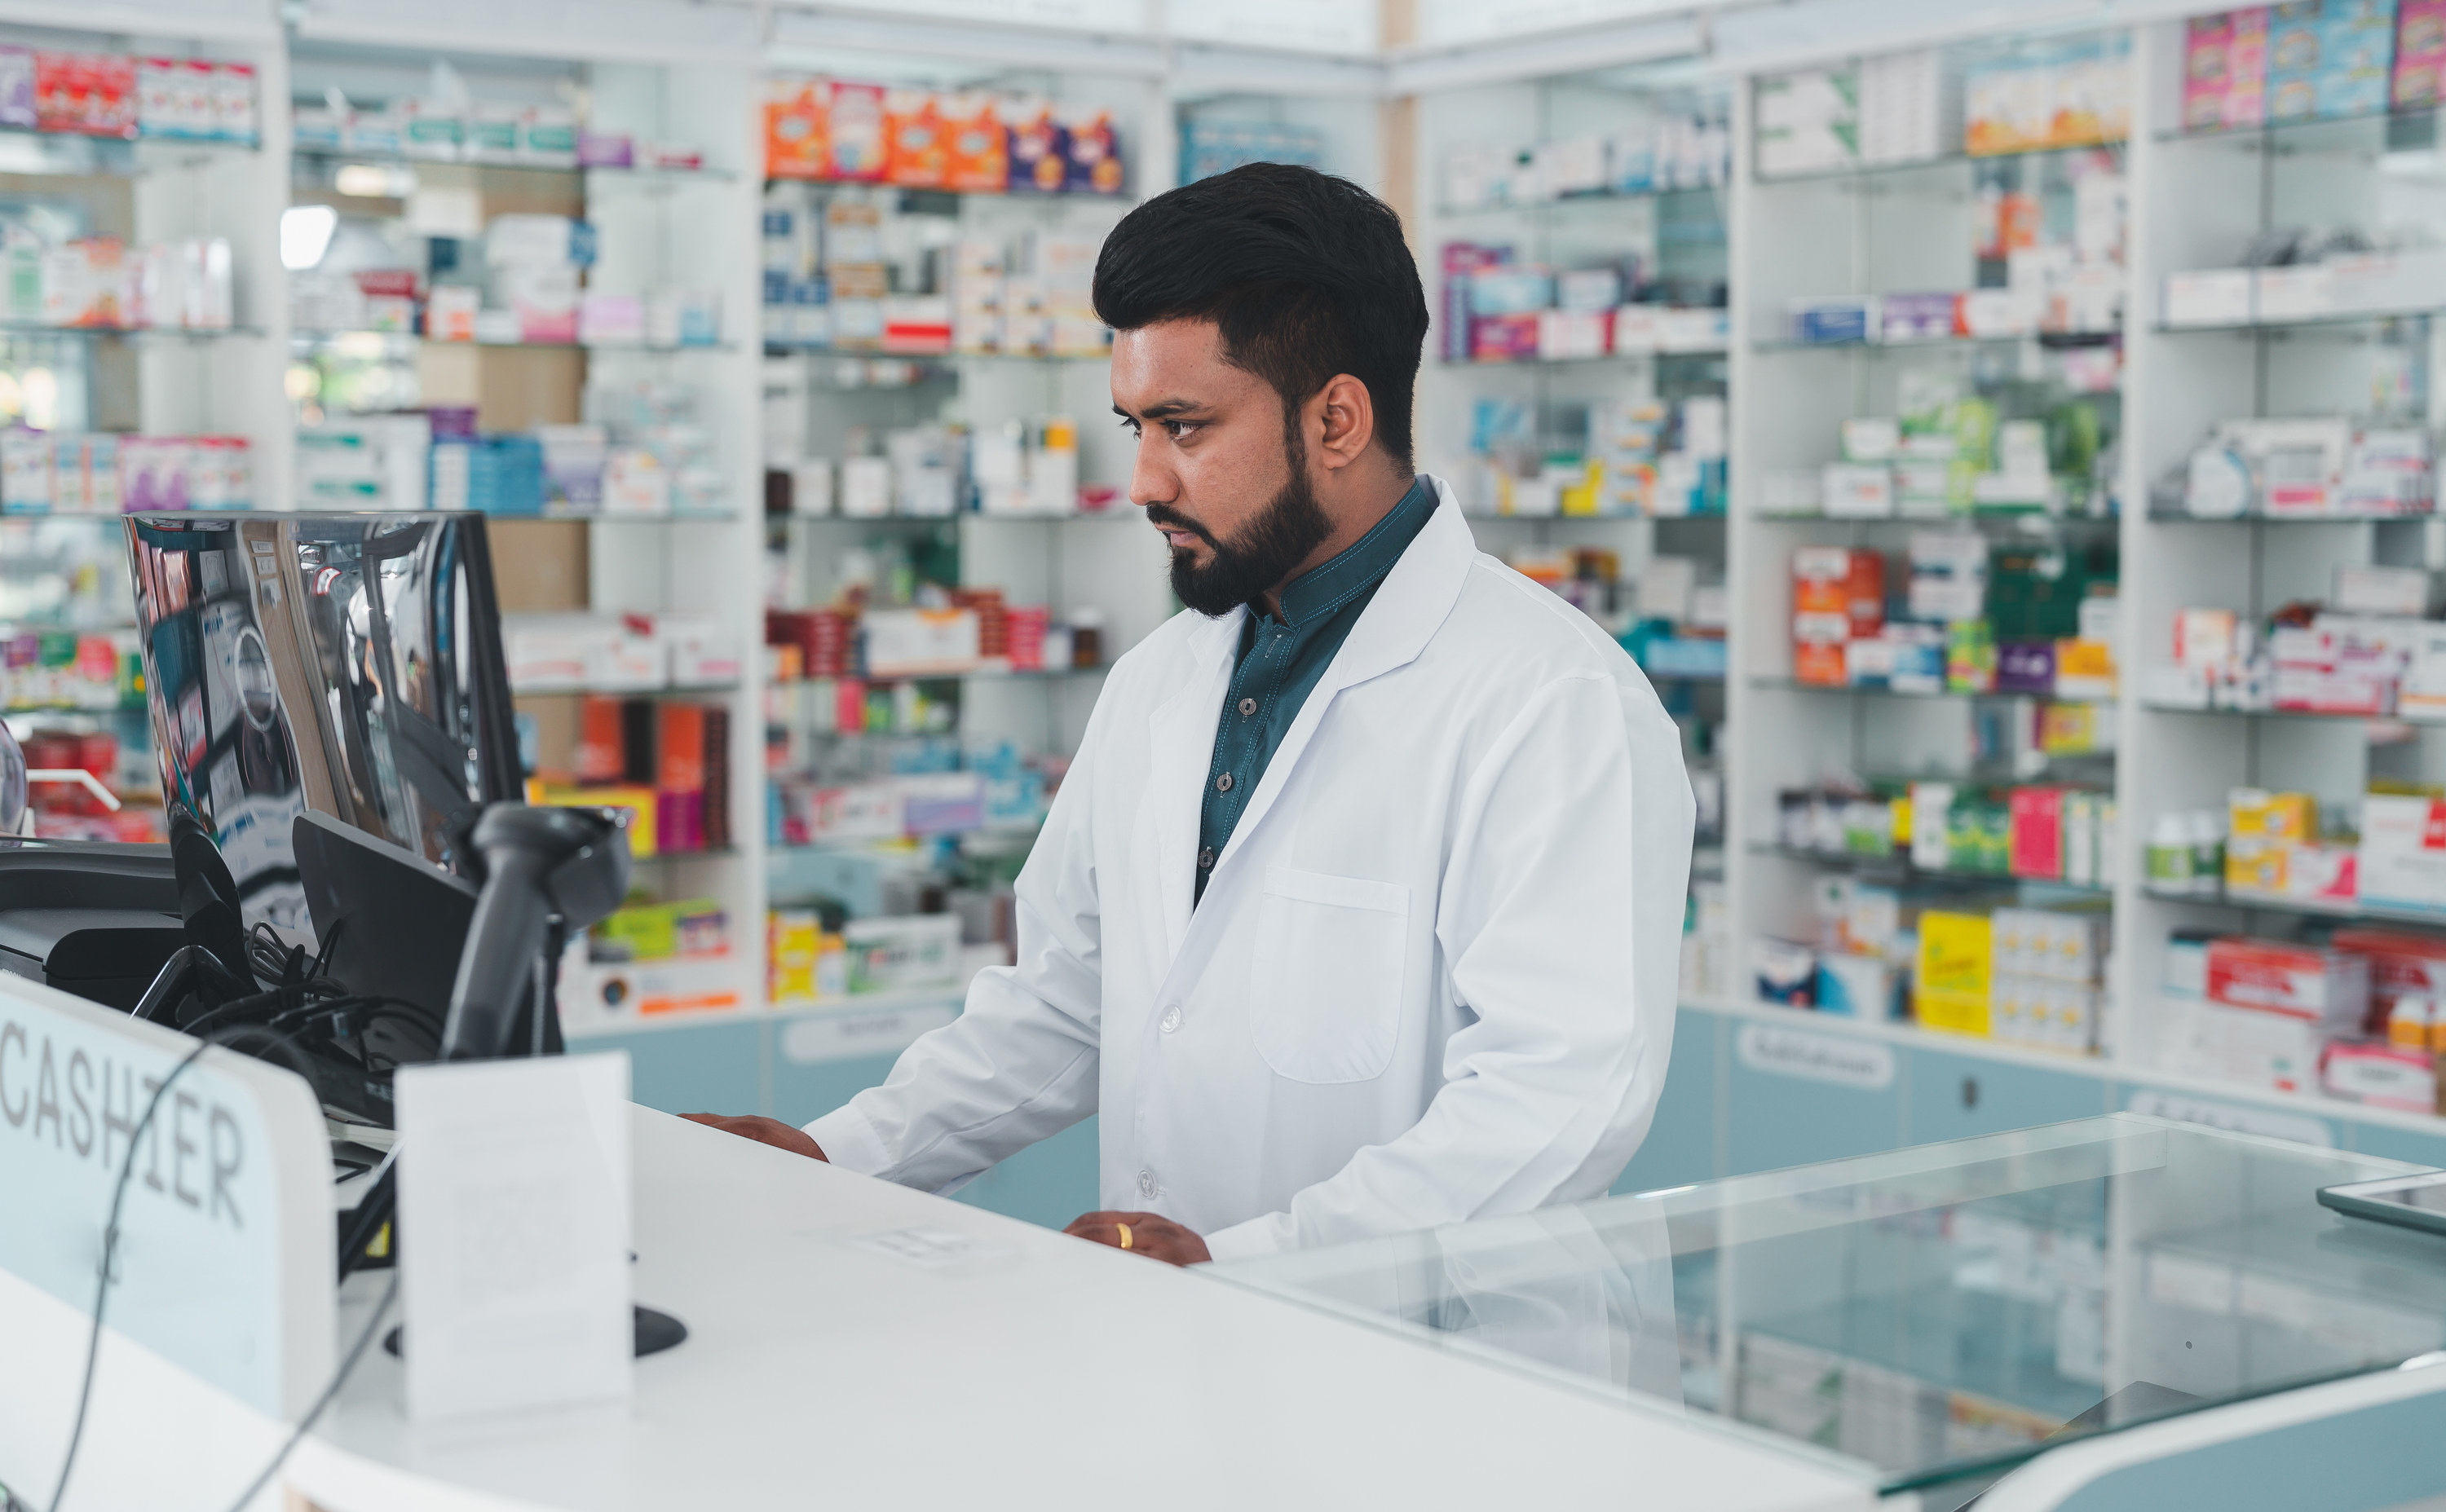 A pharmacist assistant at the cash register